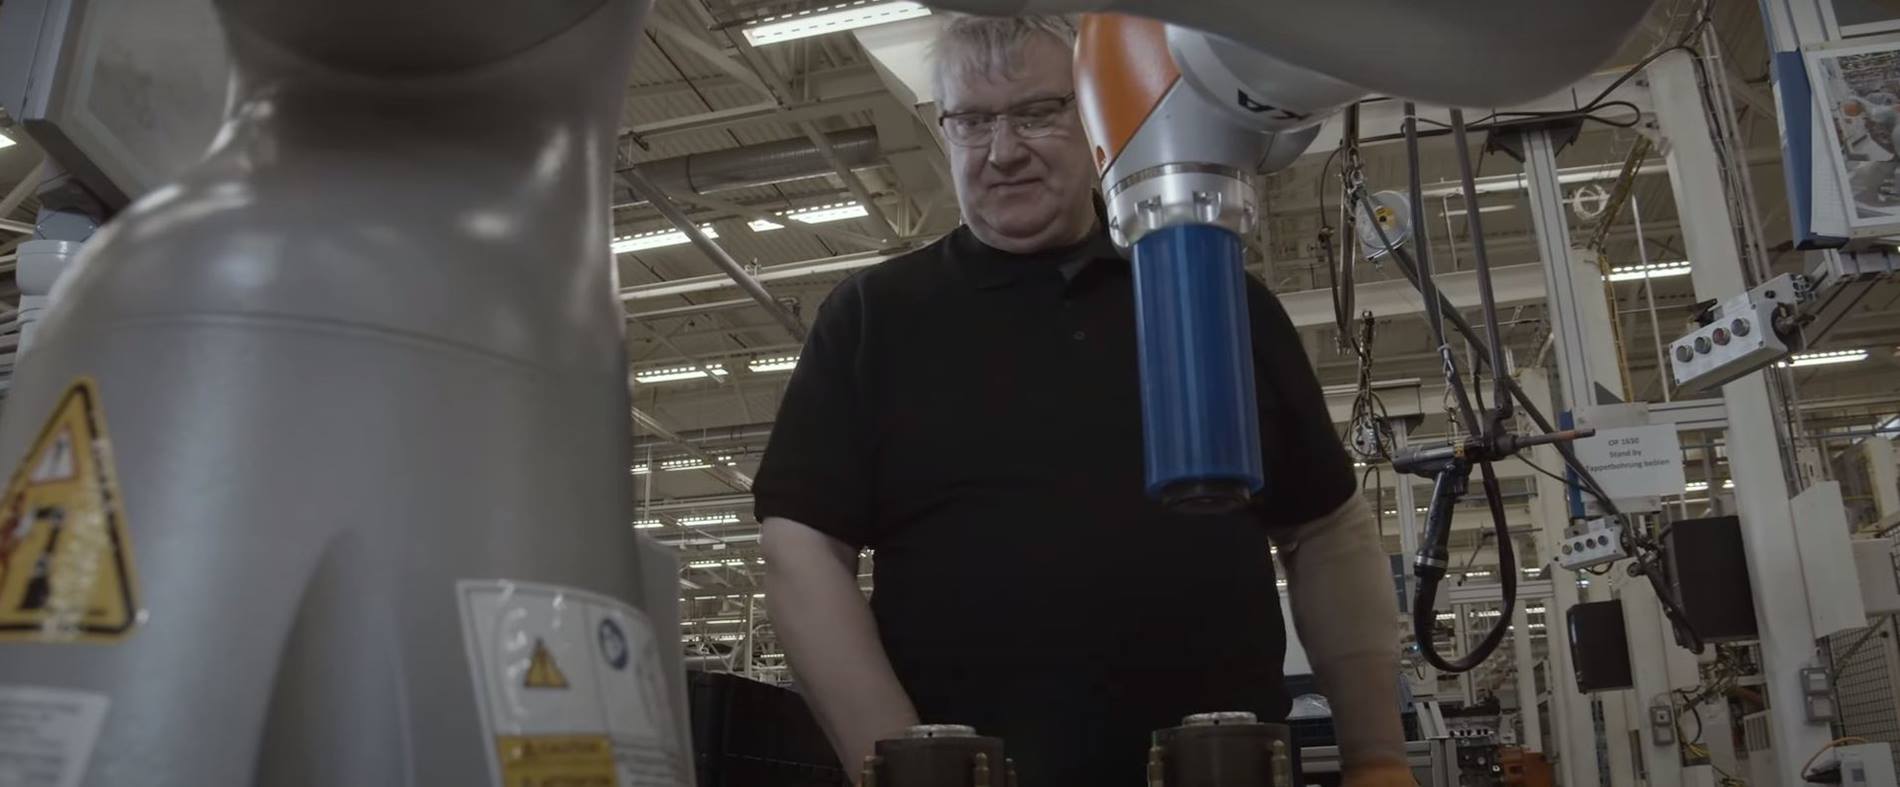 KUKA cobot supports a man in production